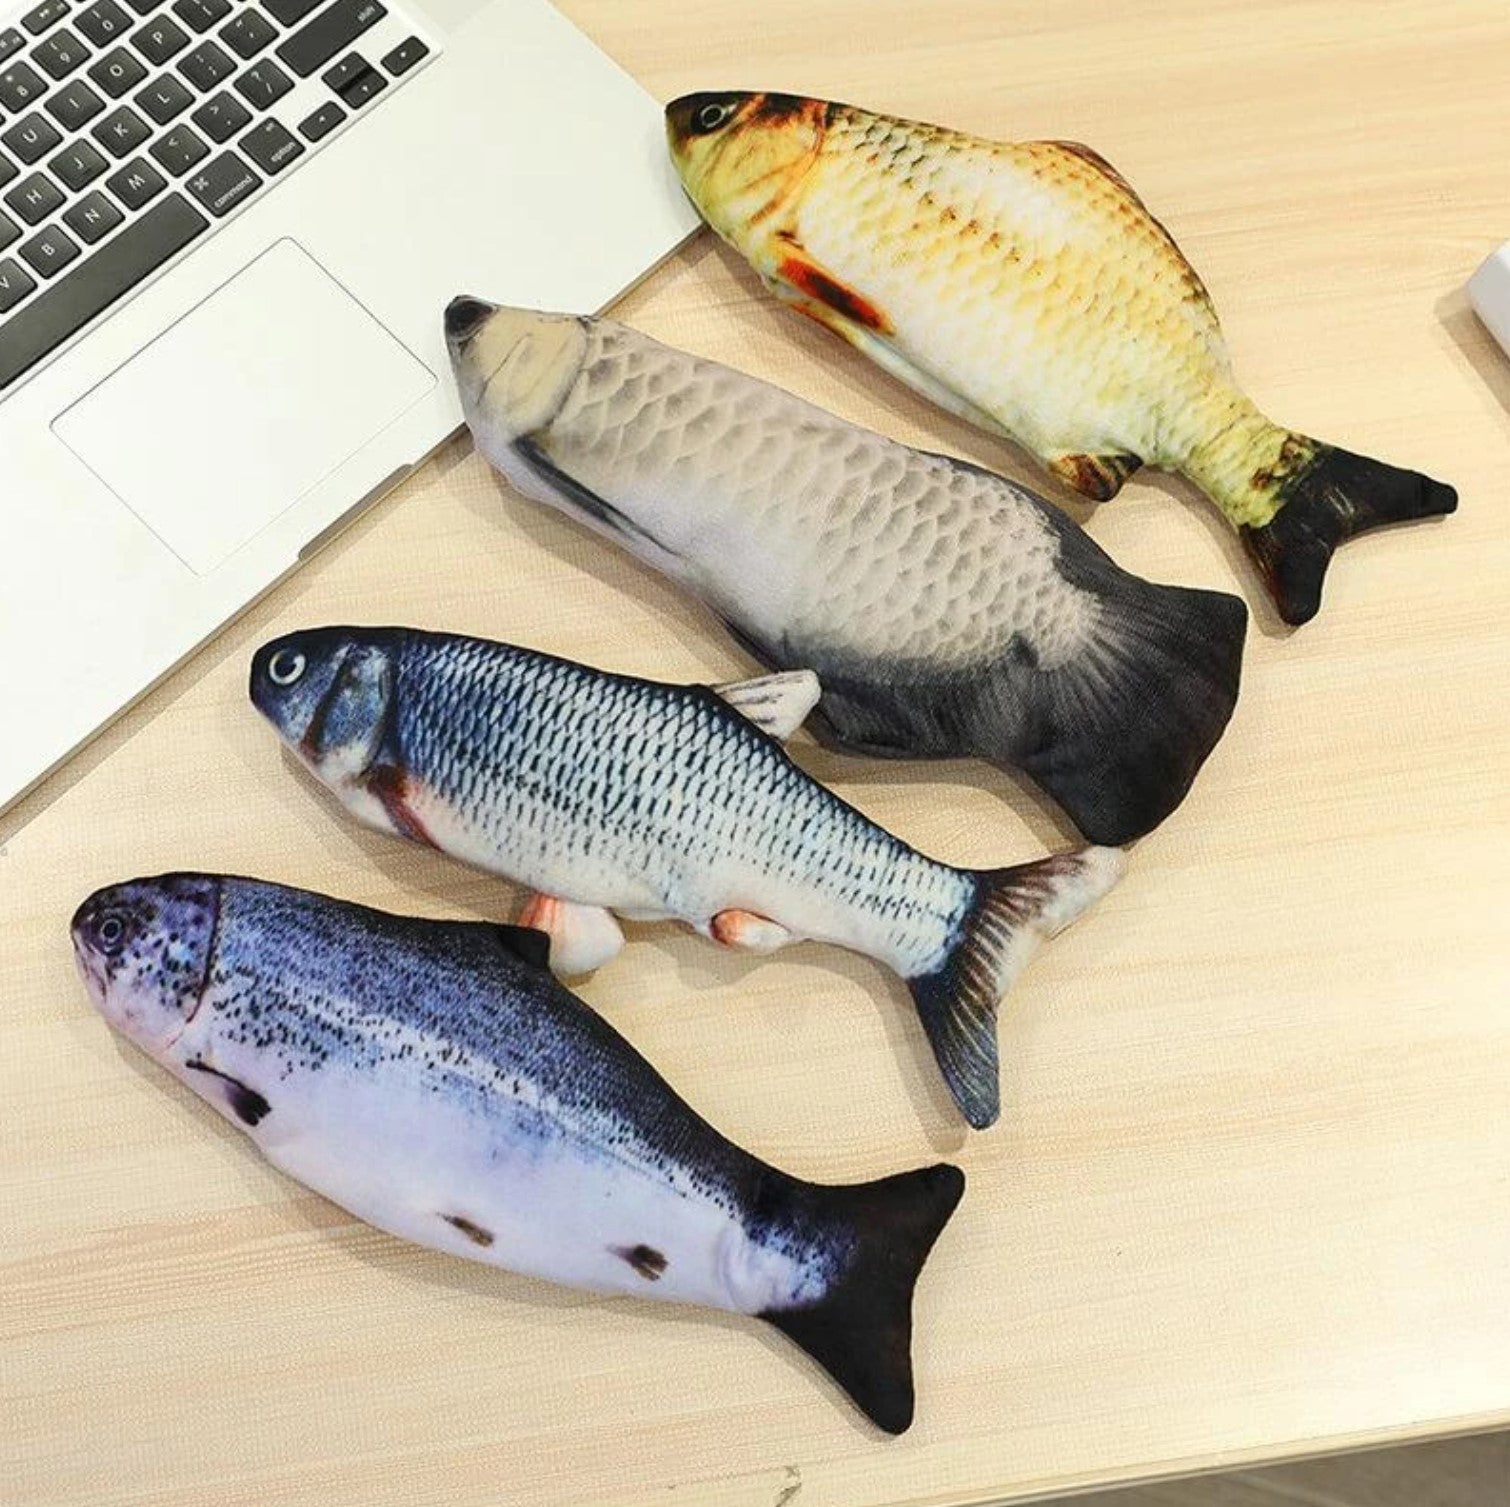 Four Different Floppy Fishy Flopping Interactive Dog Toys On Table